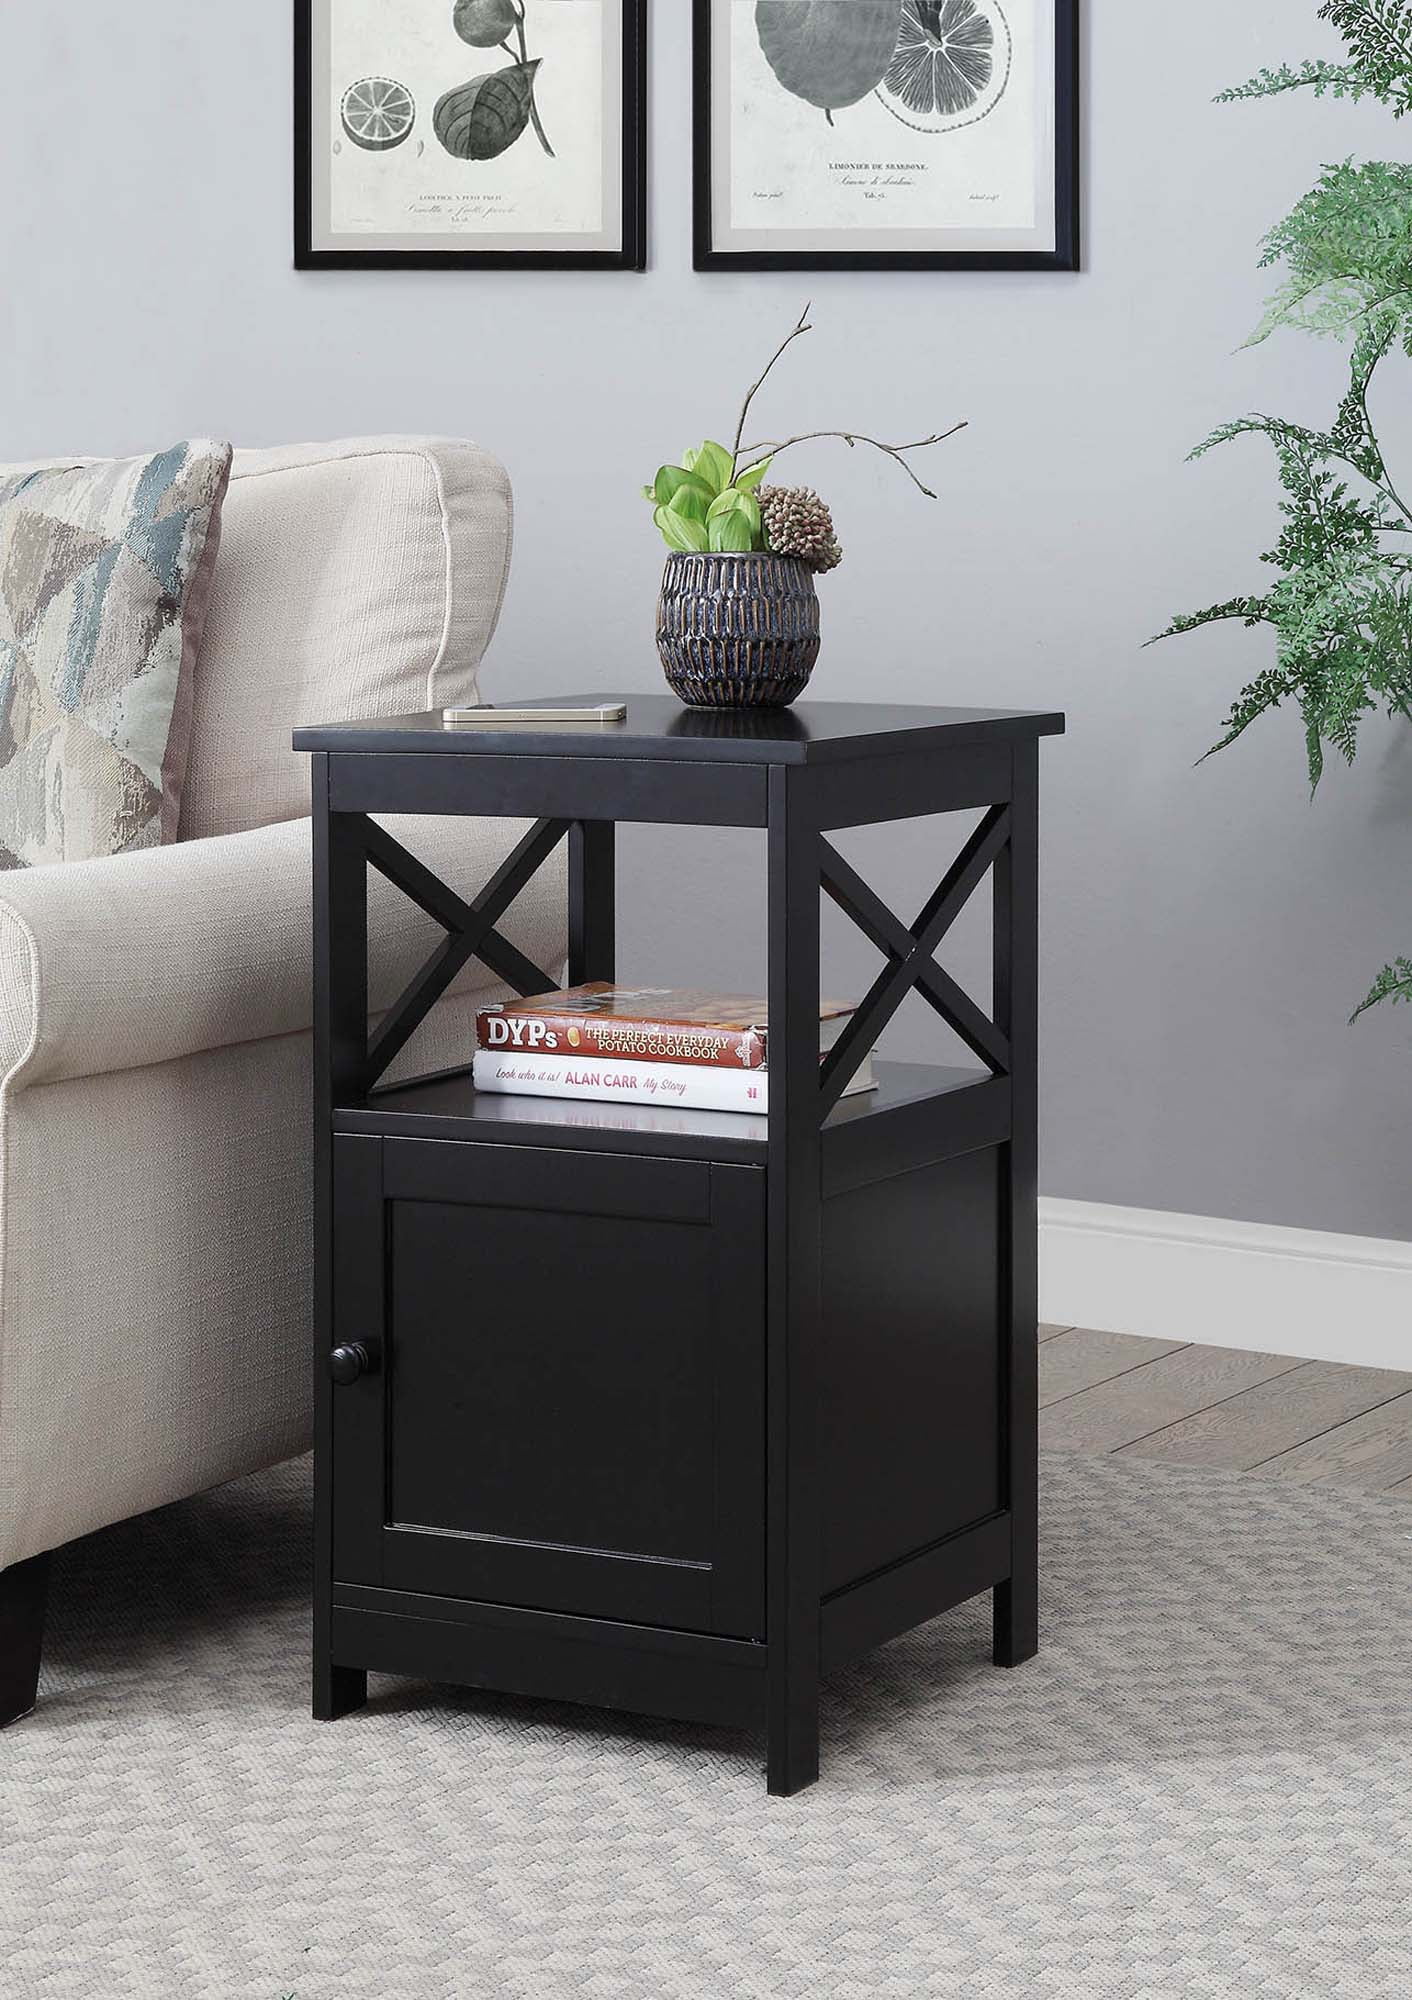 Convenience Concepts Oxford End Table, Convenience Concepts Oxford Coffee Table Black